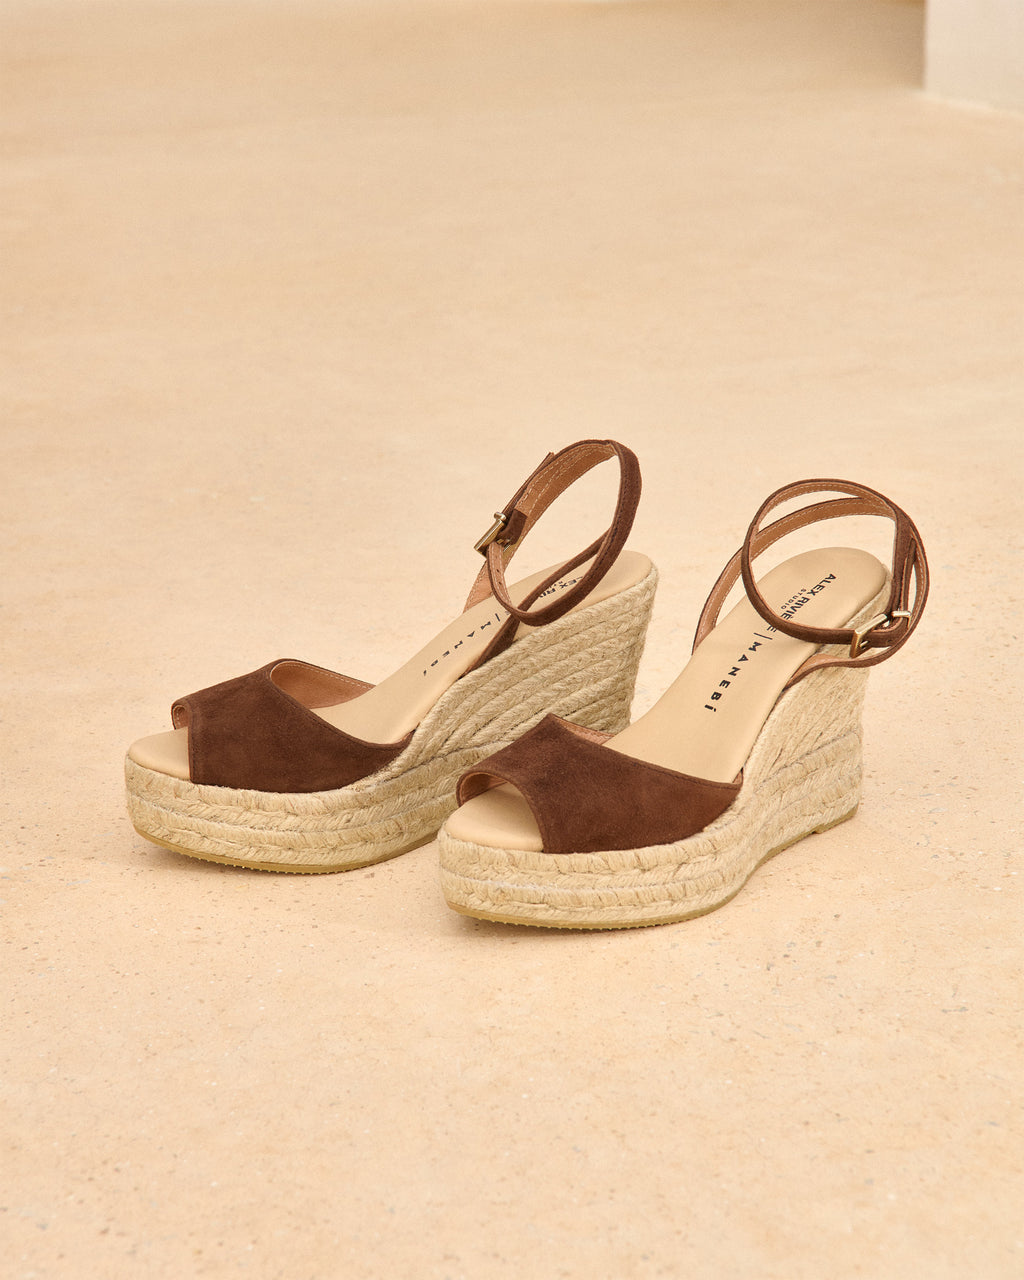 Viky Soft Suede|Wedge Espadrilles - Open Toe Tobacco